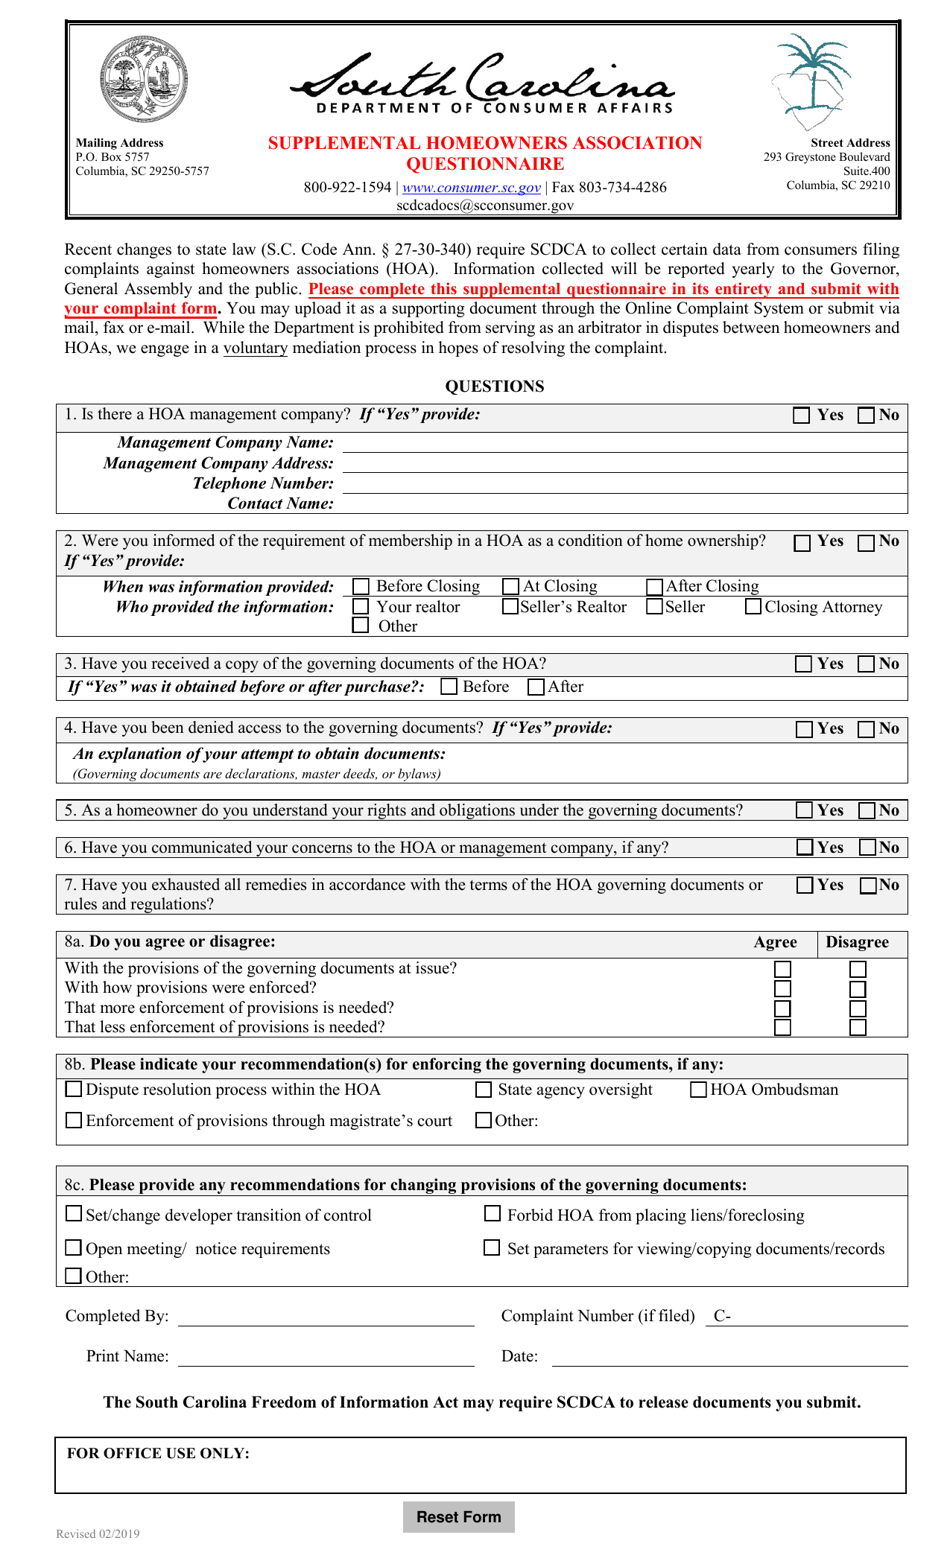 Supplemental Homeowners Association Questionnaire - South Carolina, Page 1